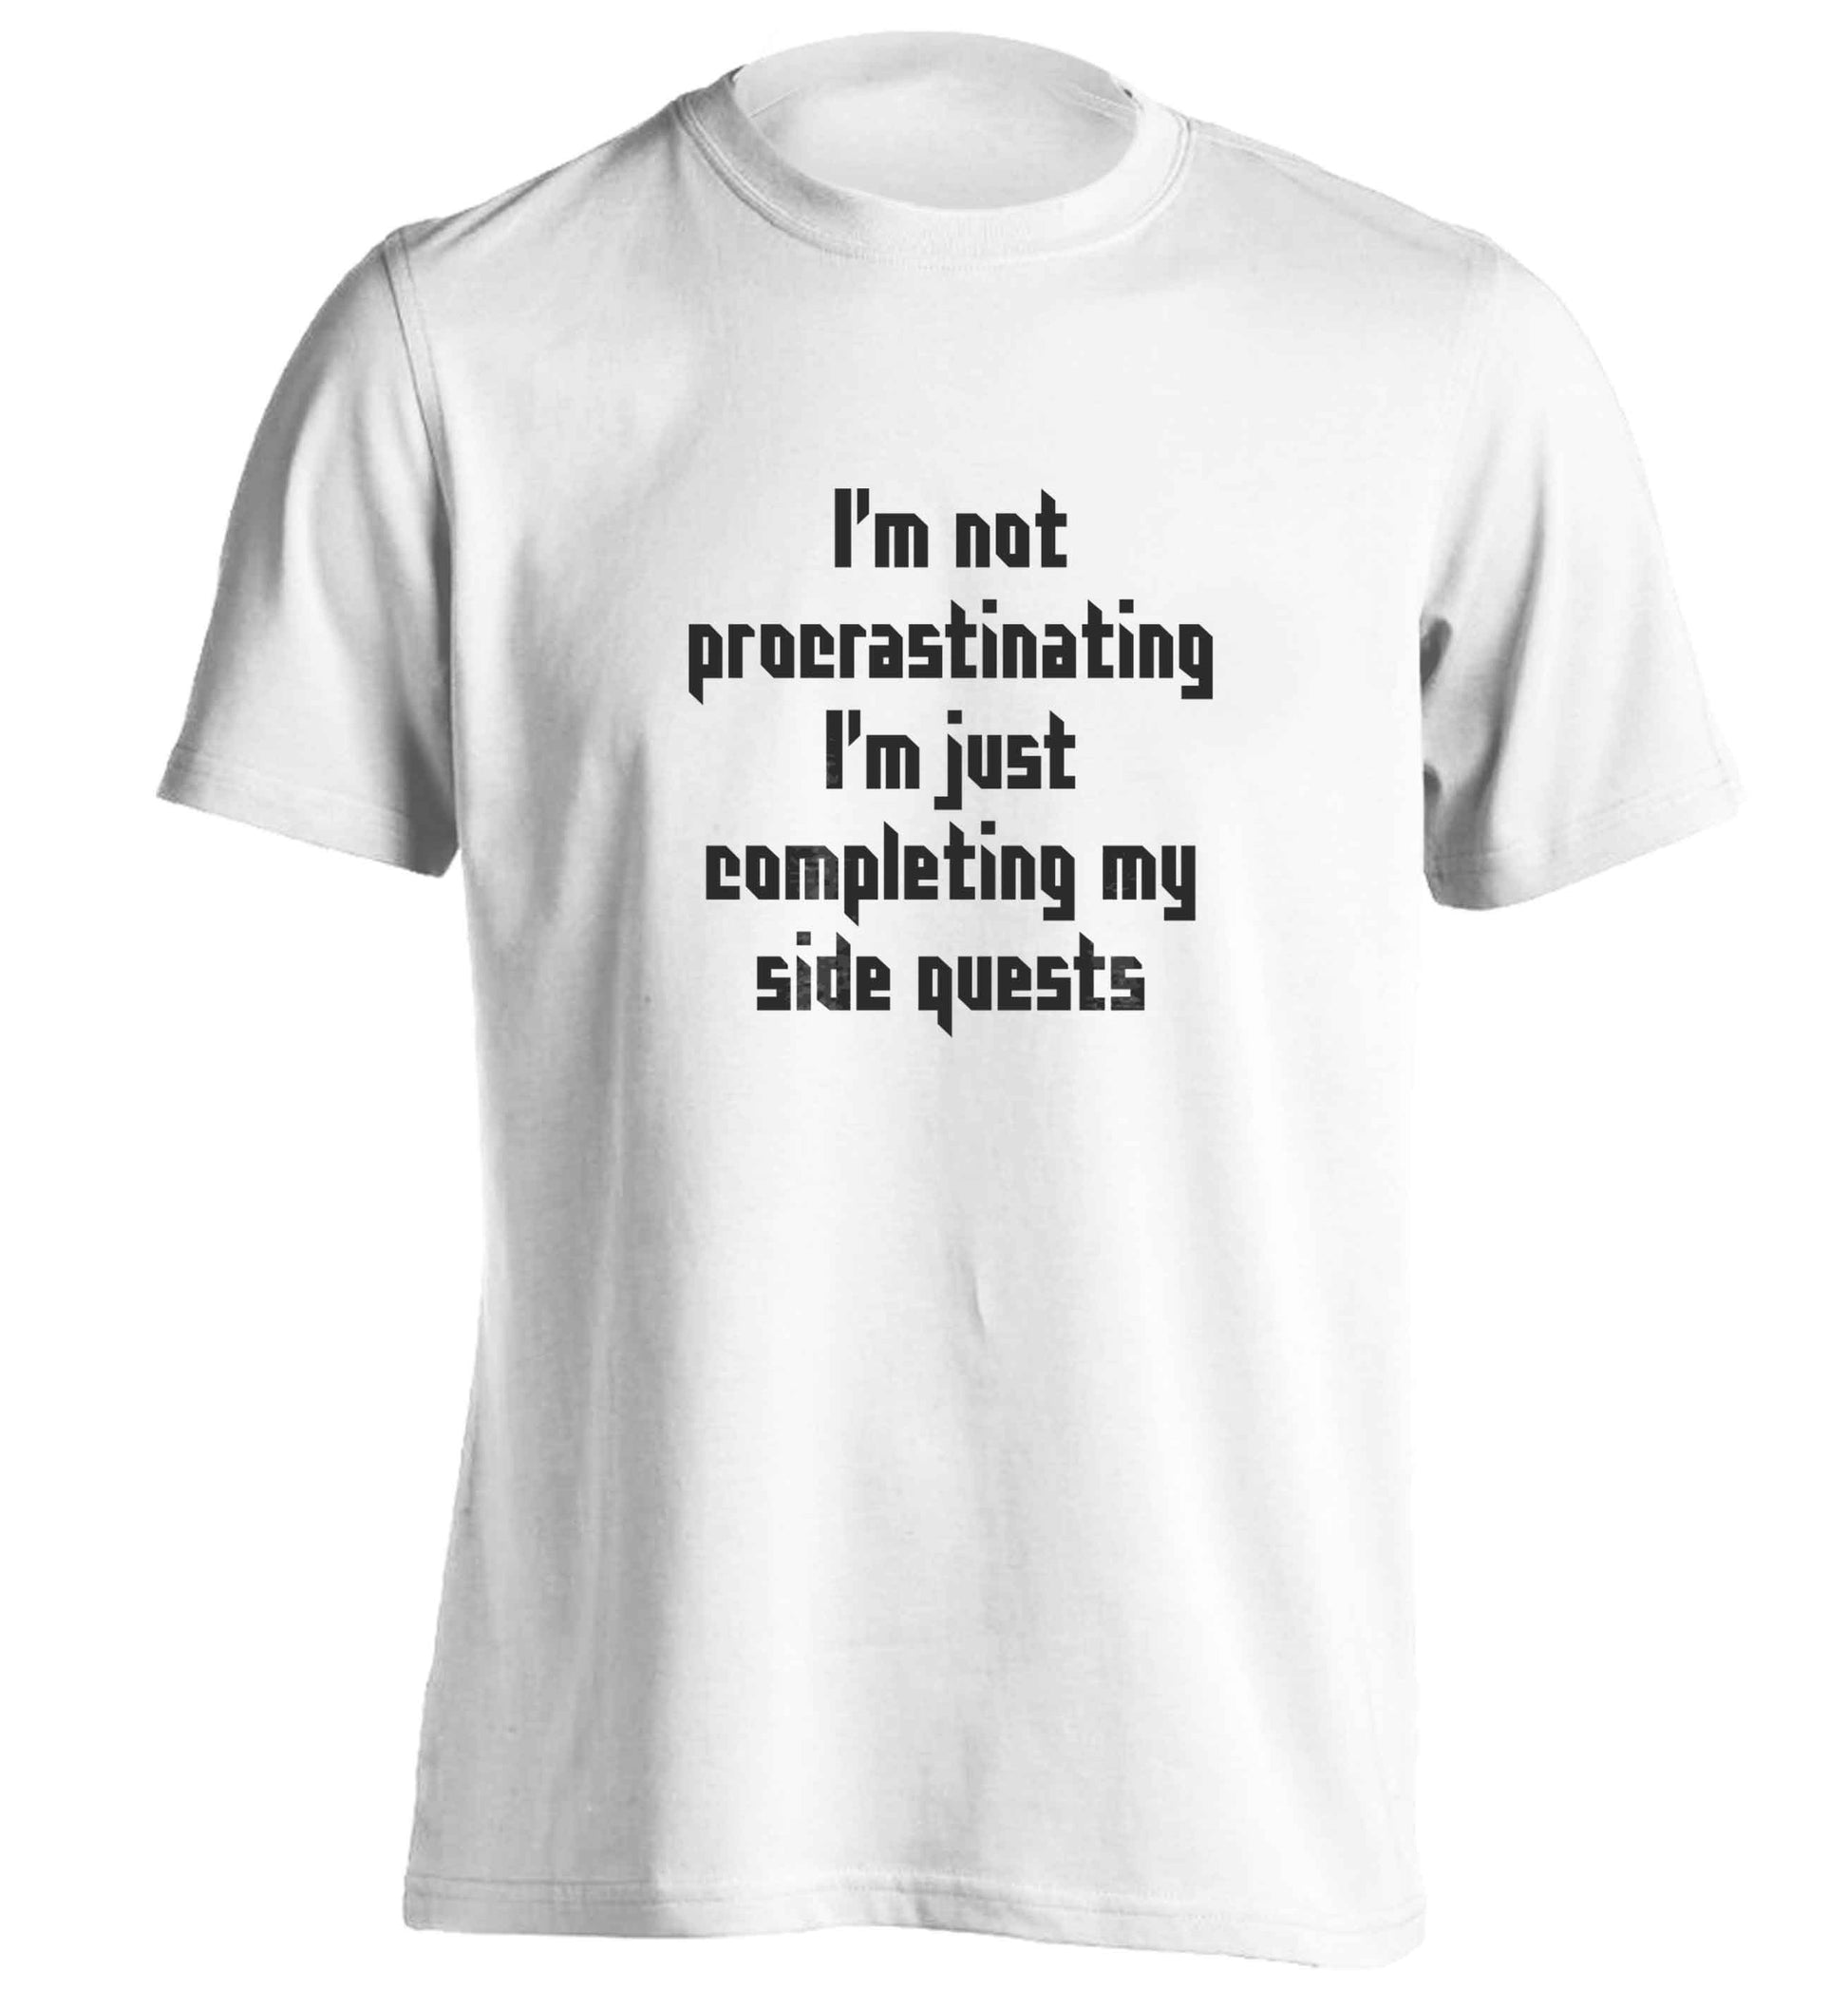 I'm not procrastinating I'm just completing my side quests adults unisex white Tshirt 2XL